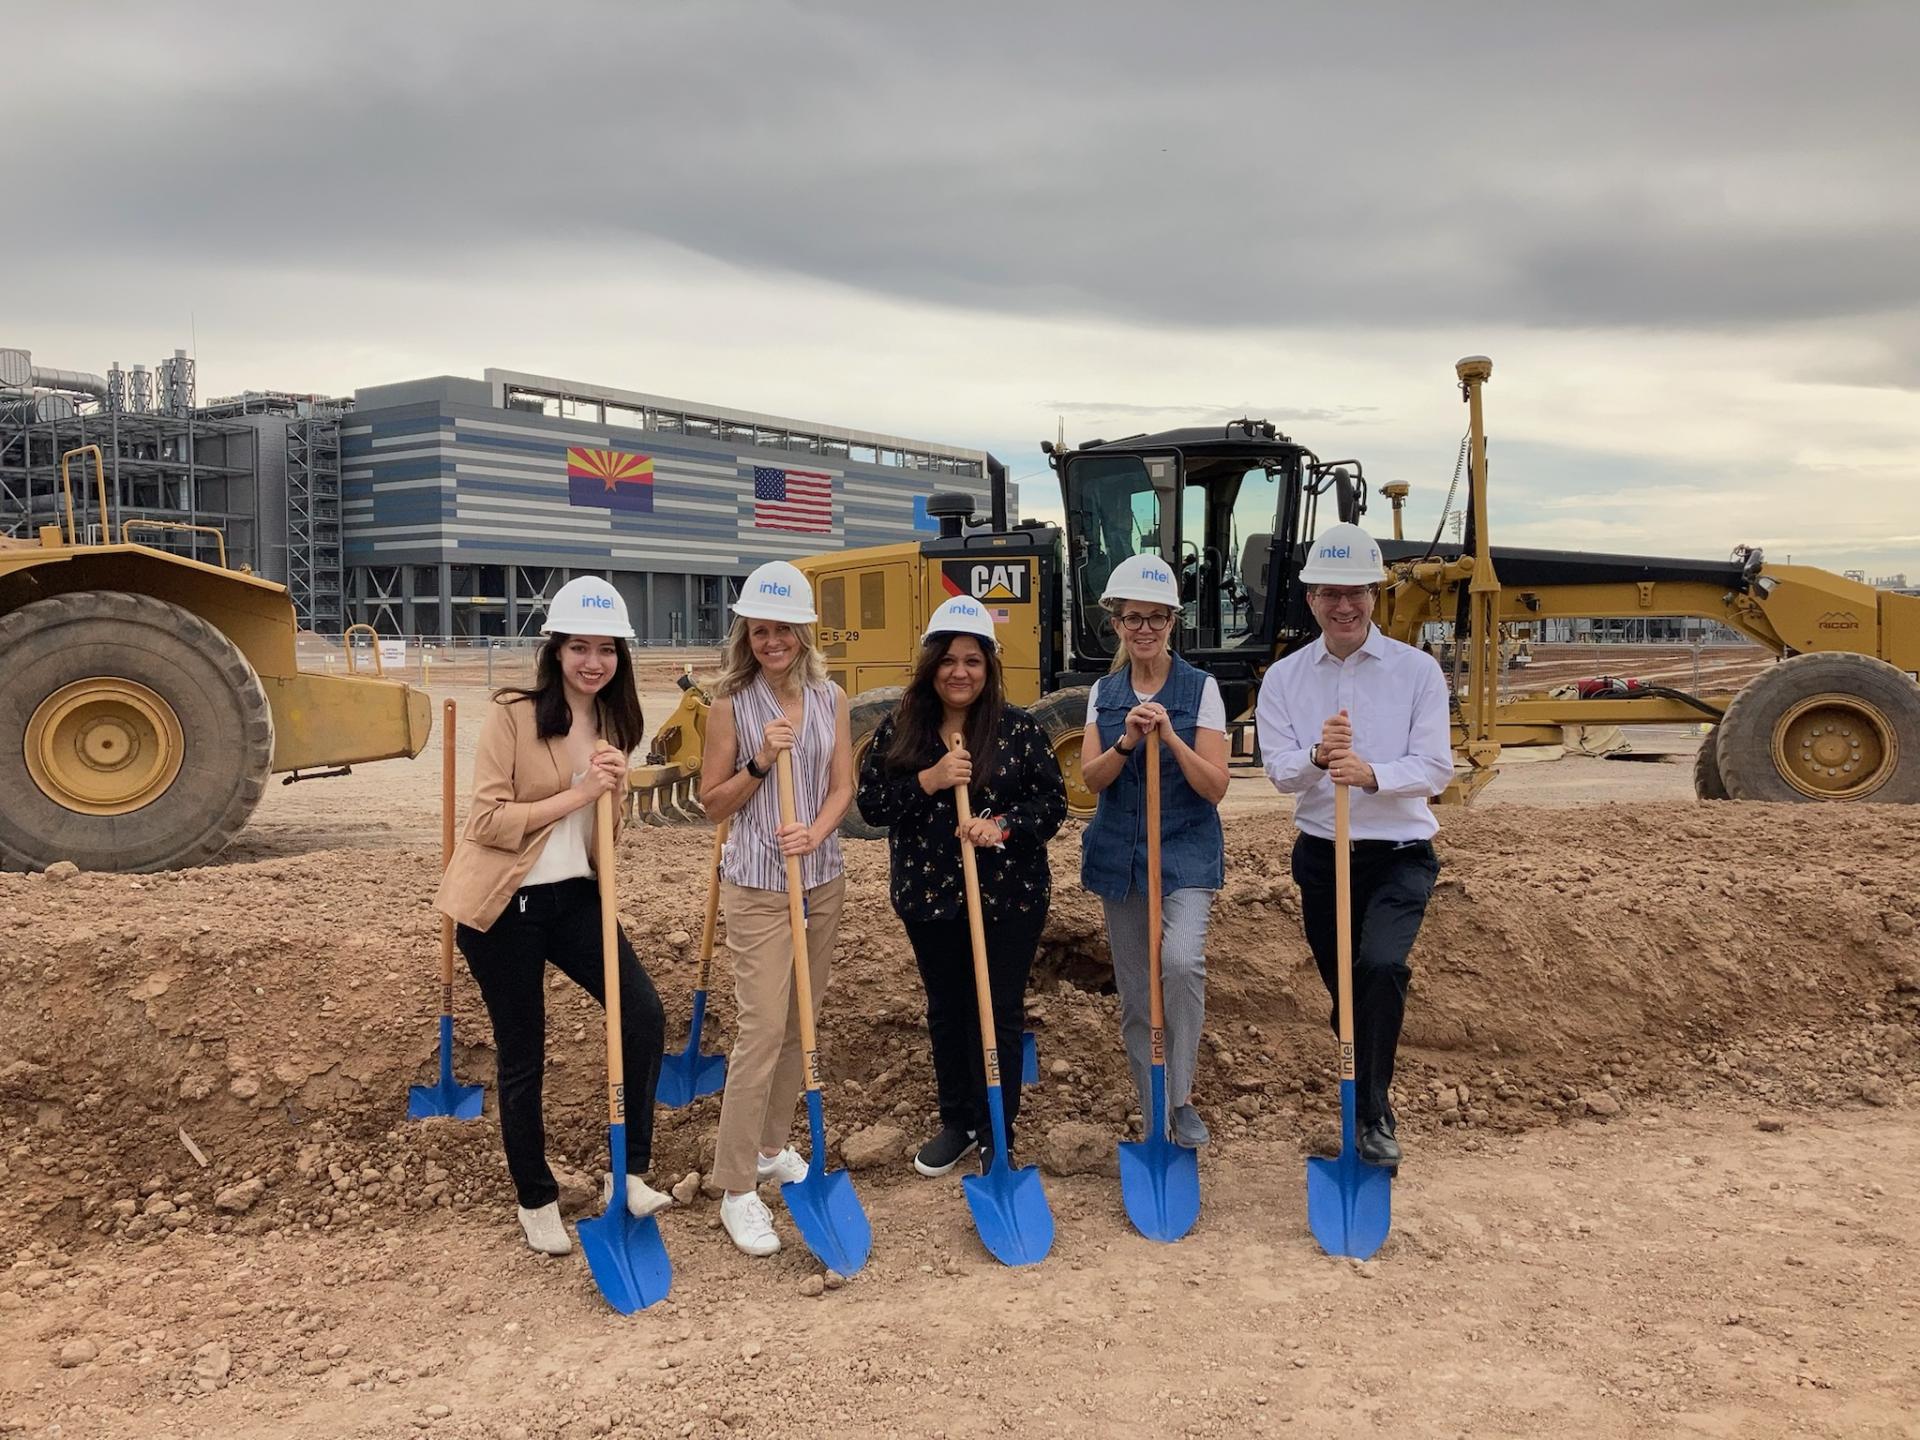 10 to 1 Public Relations Promotes Intel Ribbon Cutting of $20 Billion Project in Arizona 